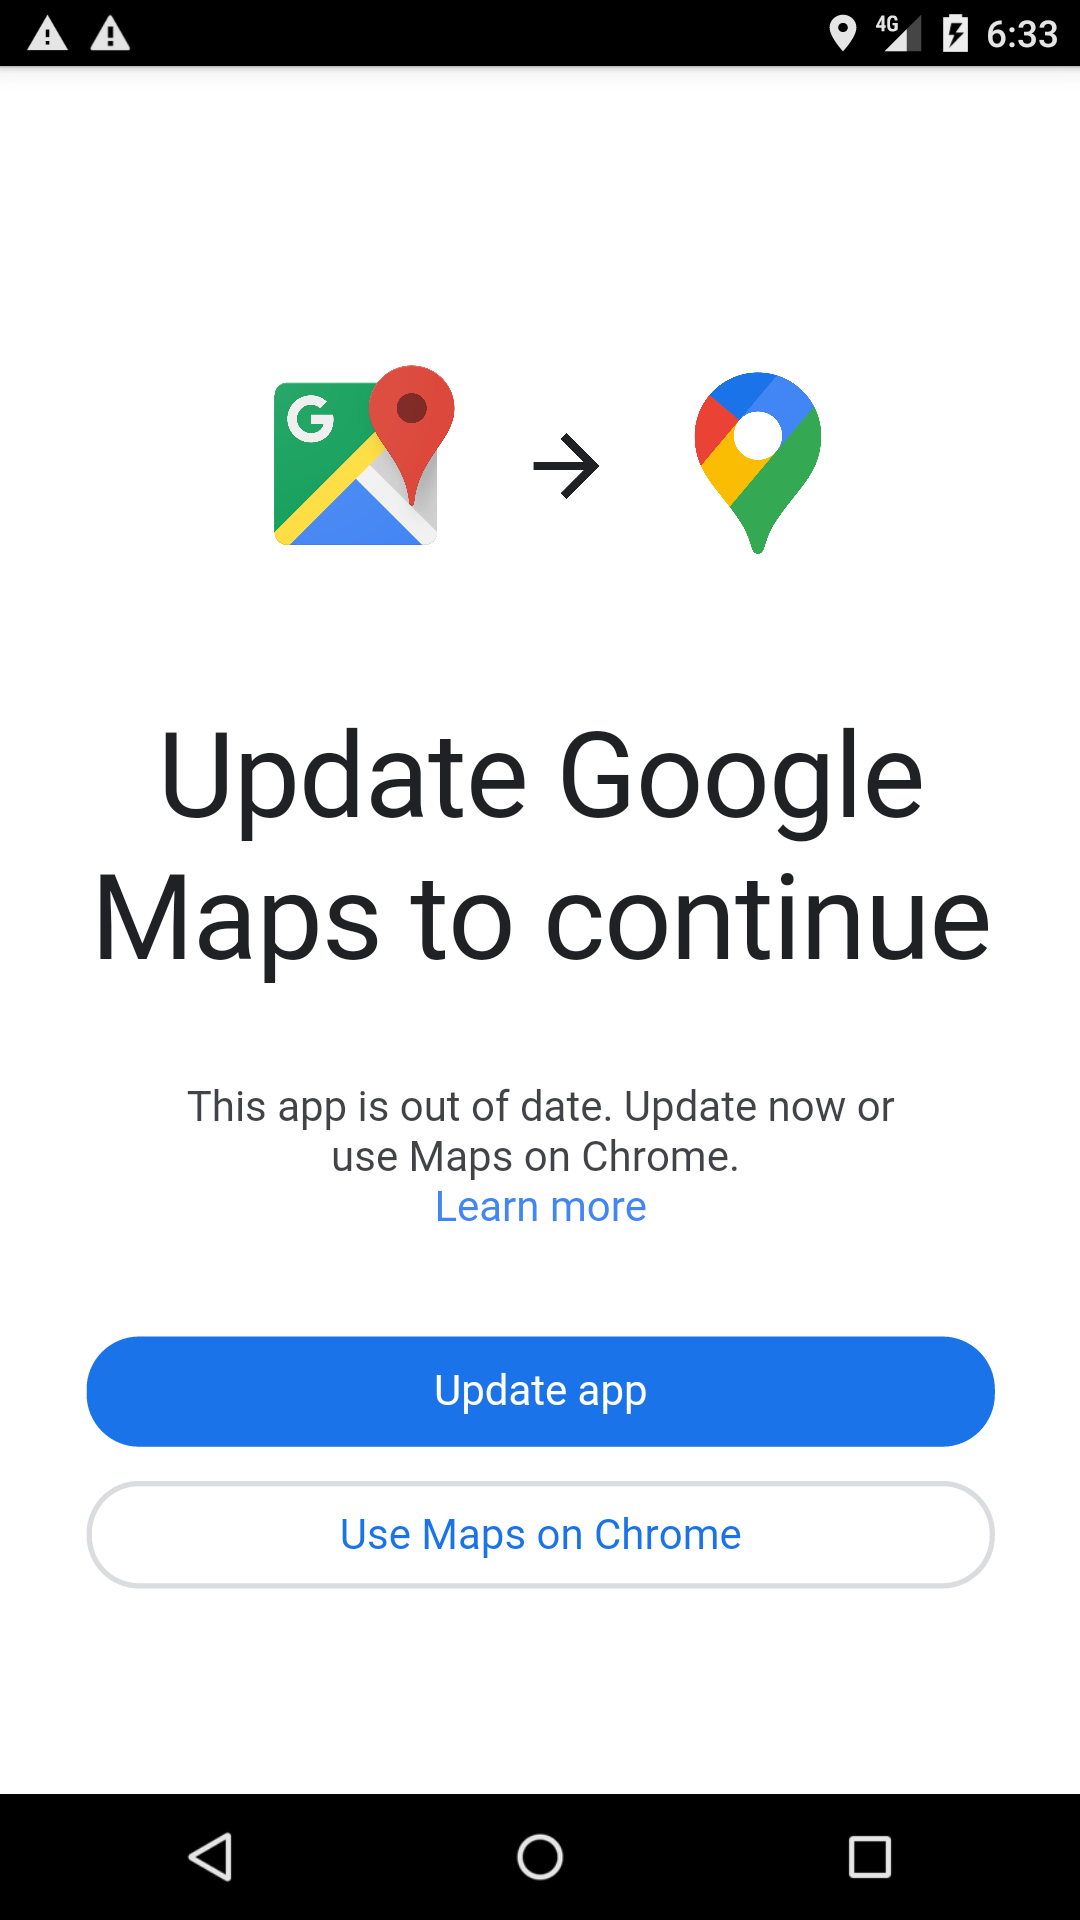 “Update Google Maps to continue: This app is out of date.”